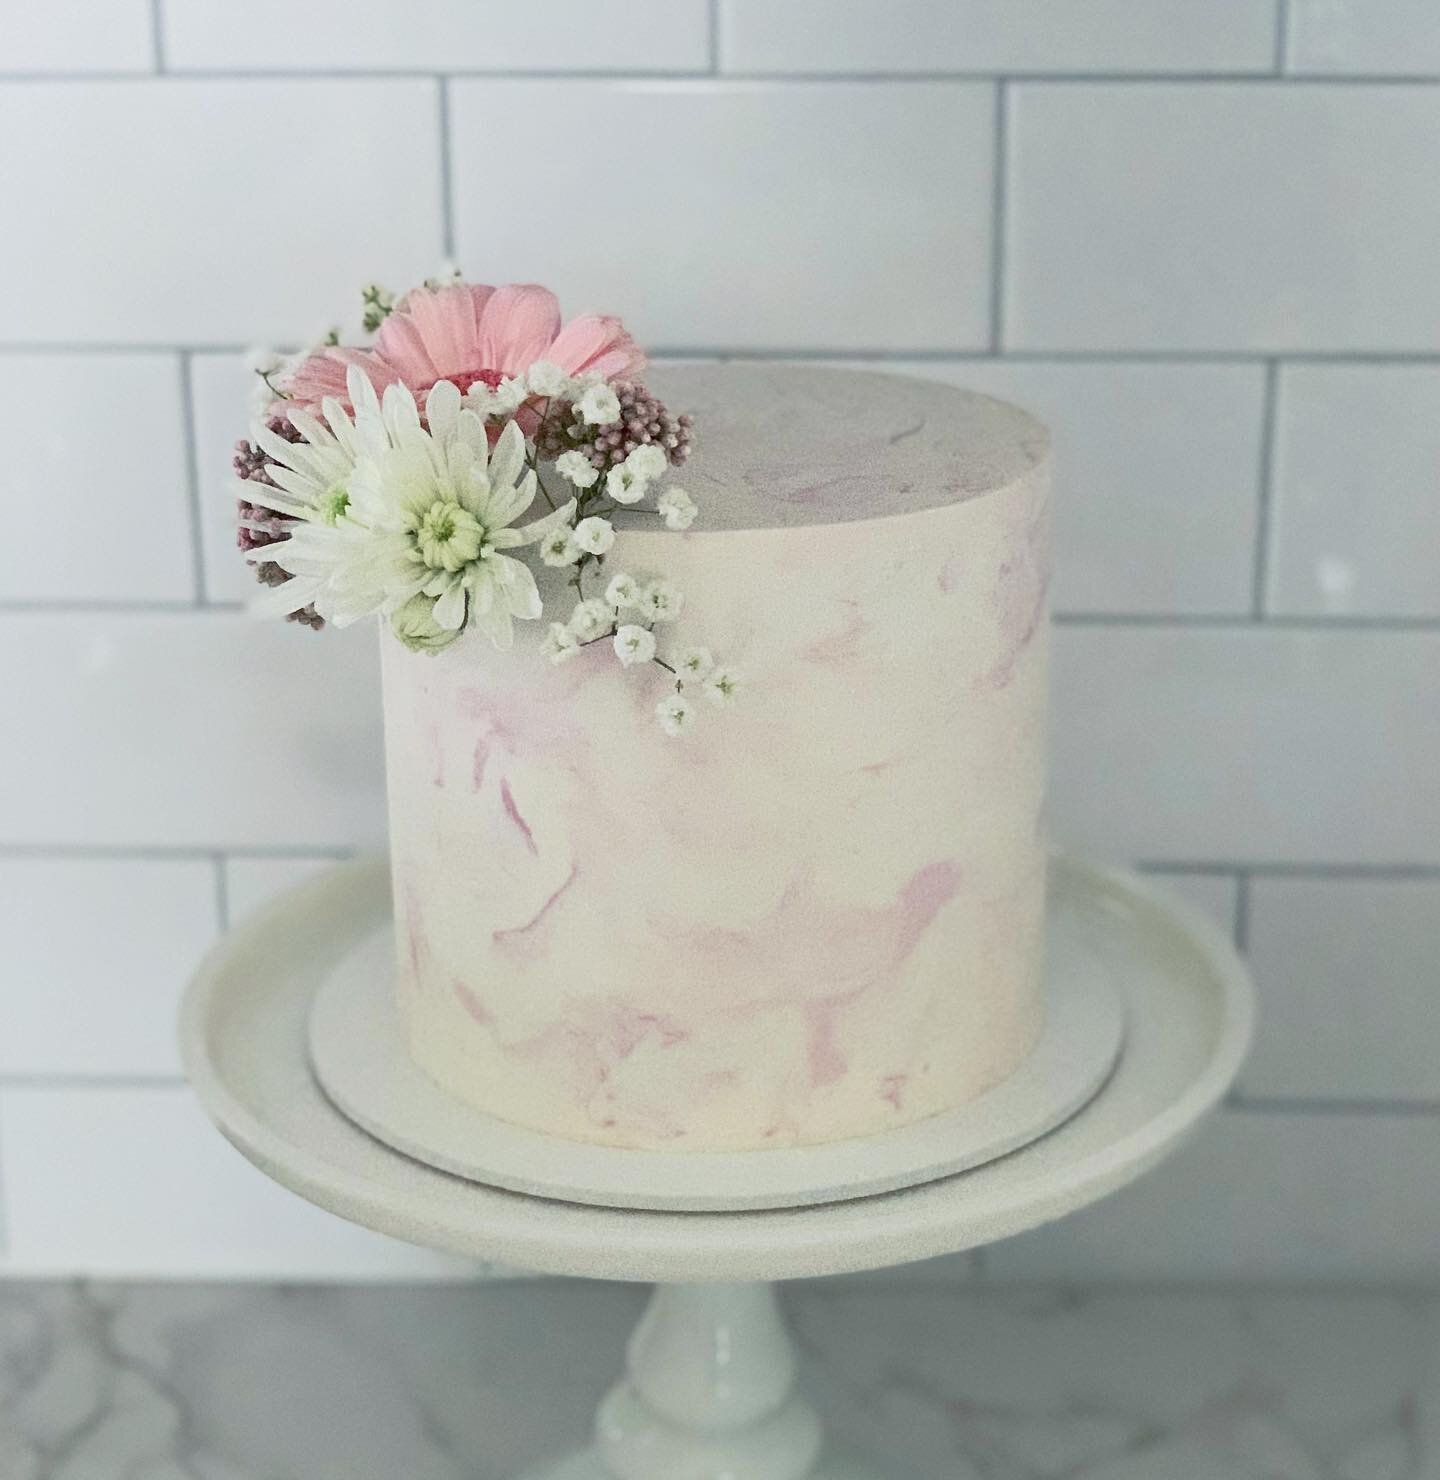 Marbled buttercream and fresh flowers for my grandmother&rsquo;s 94th birthday 🎉

Inside is lemon cake, vanilla buttercream, and lemon curd